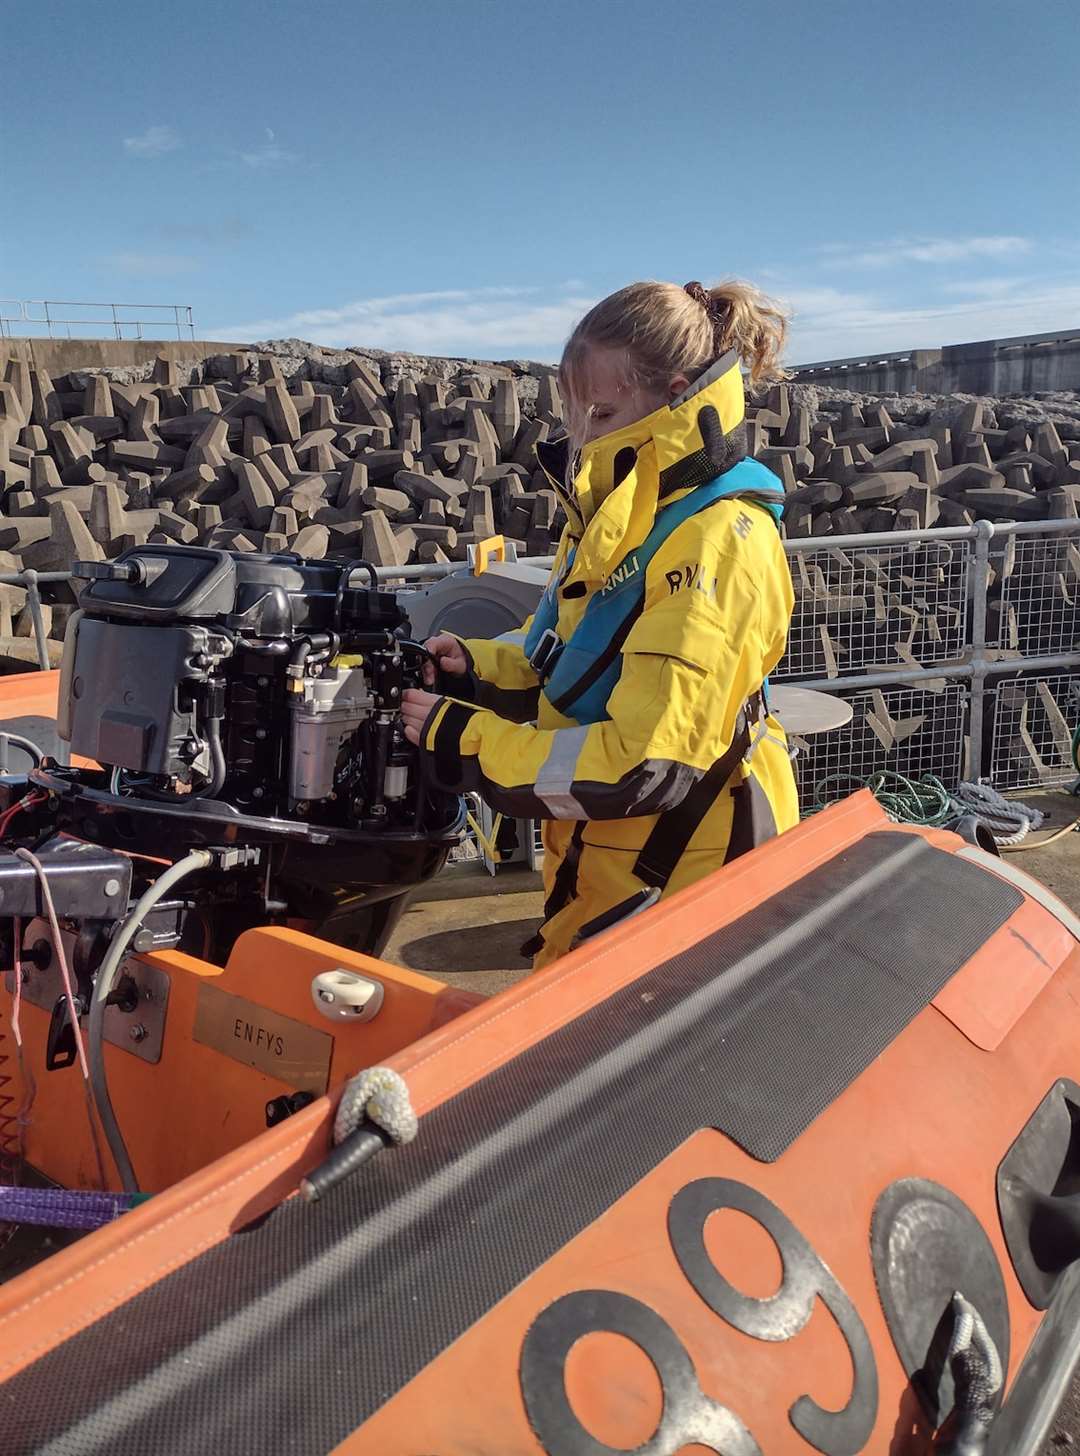 Phoebe Douglas getting to work on the engine of the boarding boat (Dunbar RNLI/Alistair Punton/PA)